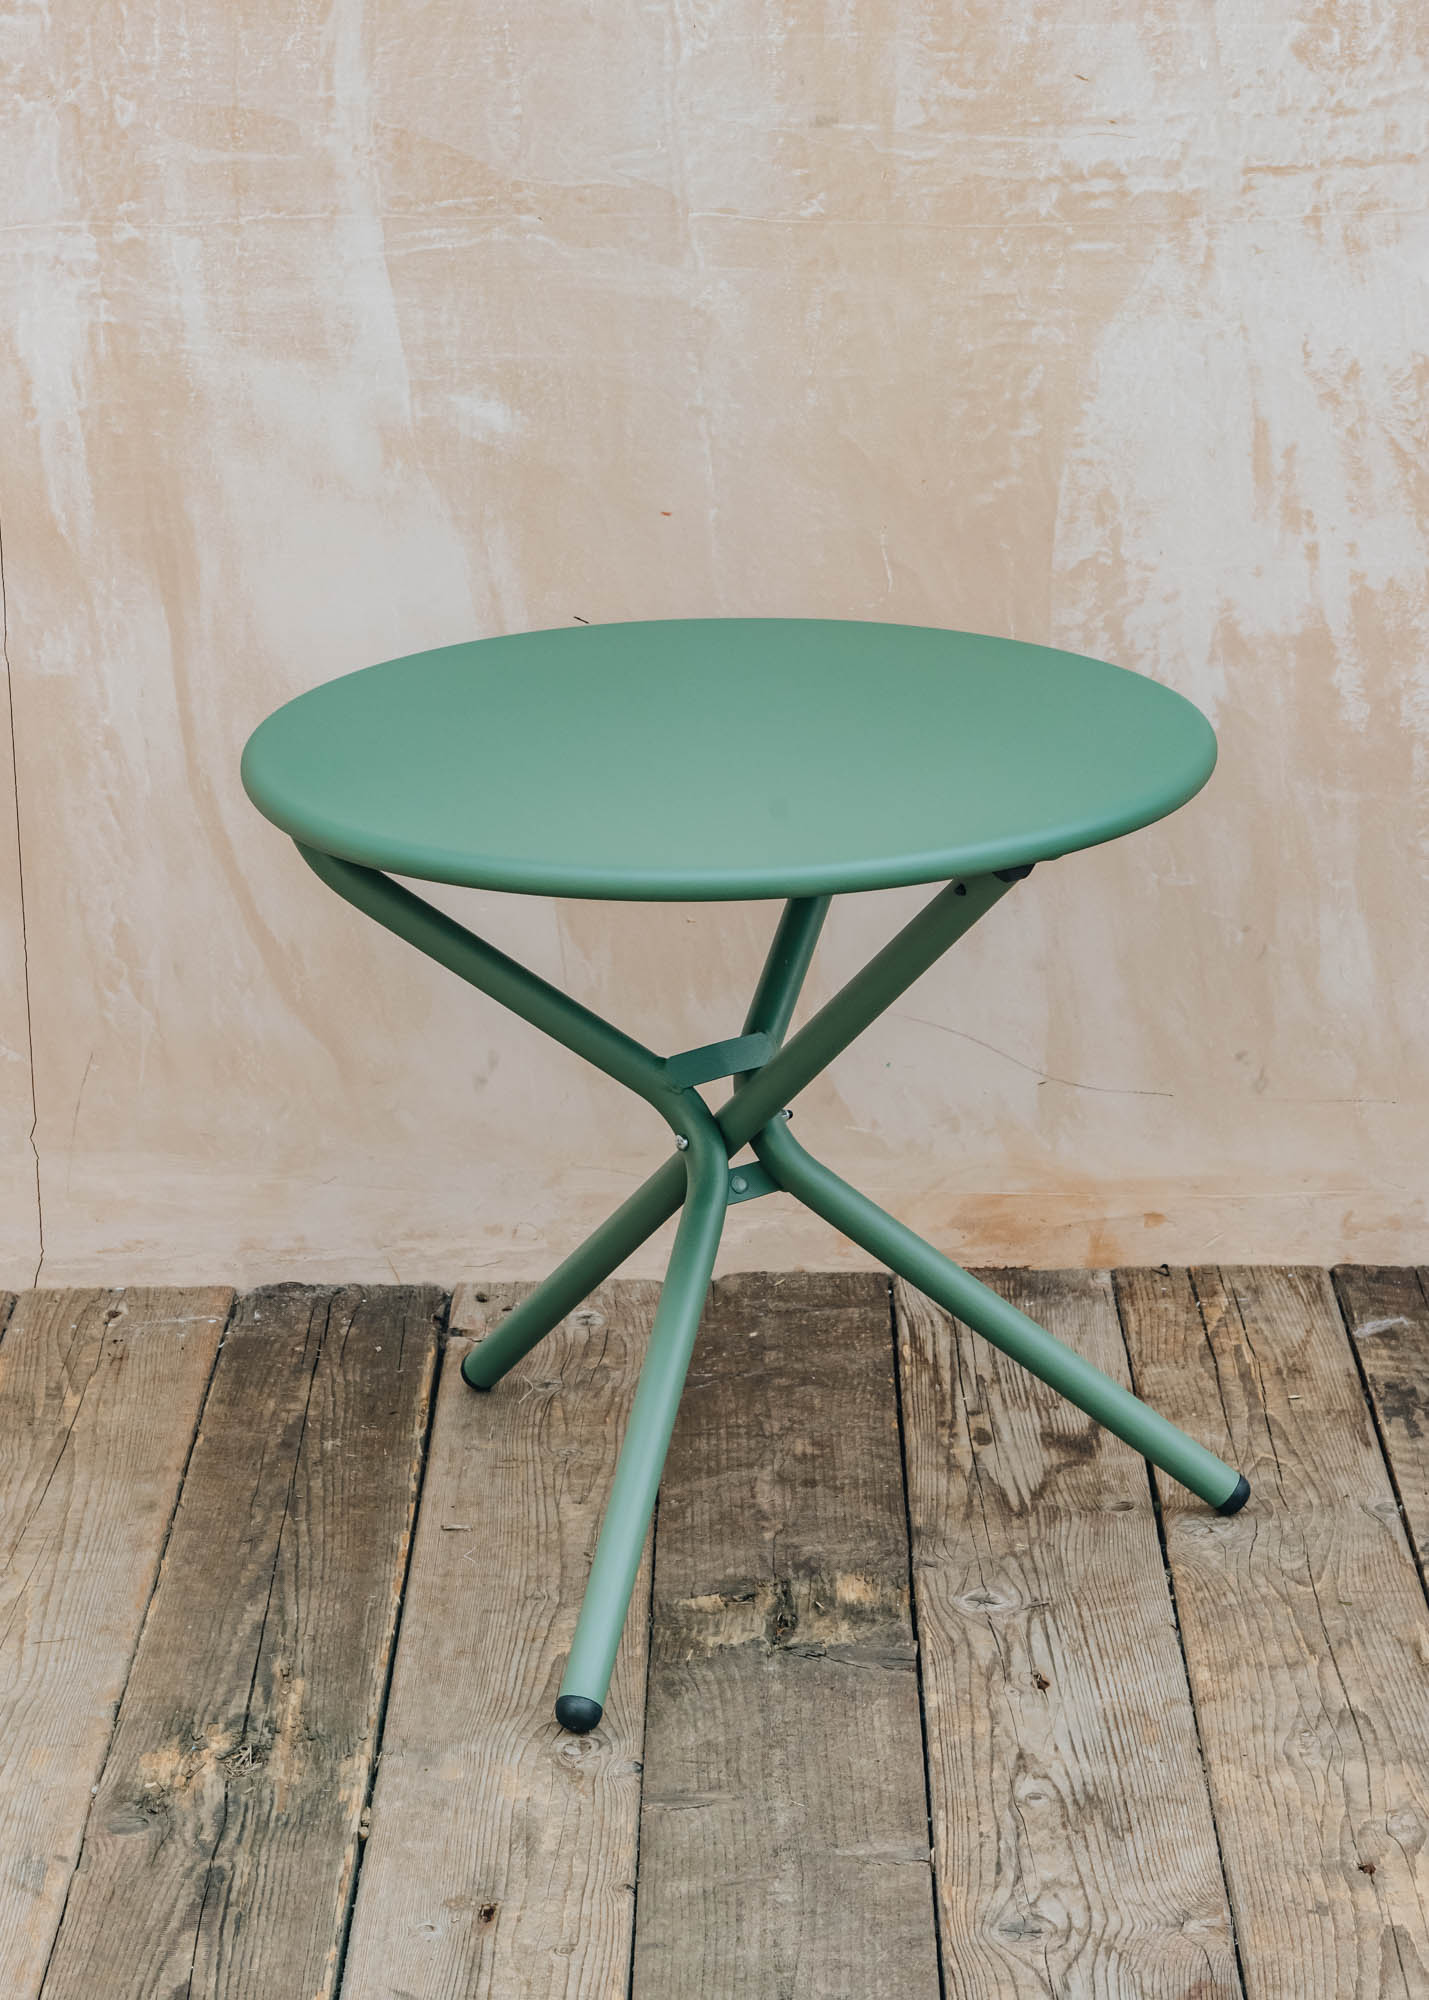 Fiam Spa Tris Round Table in Sage Green